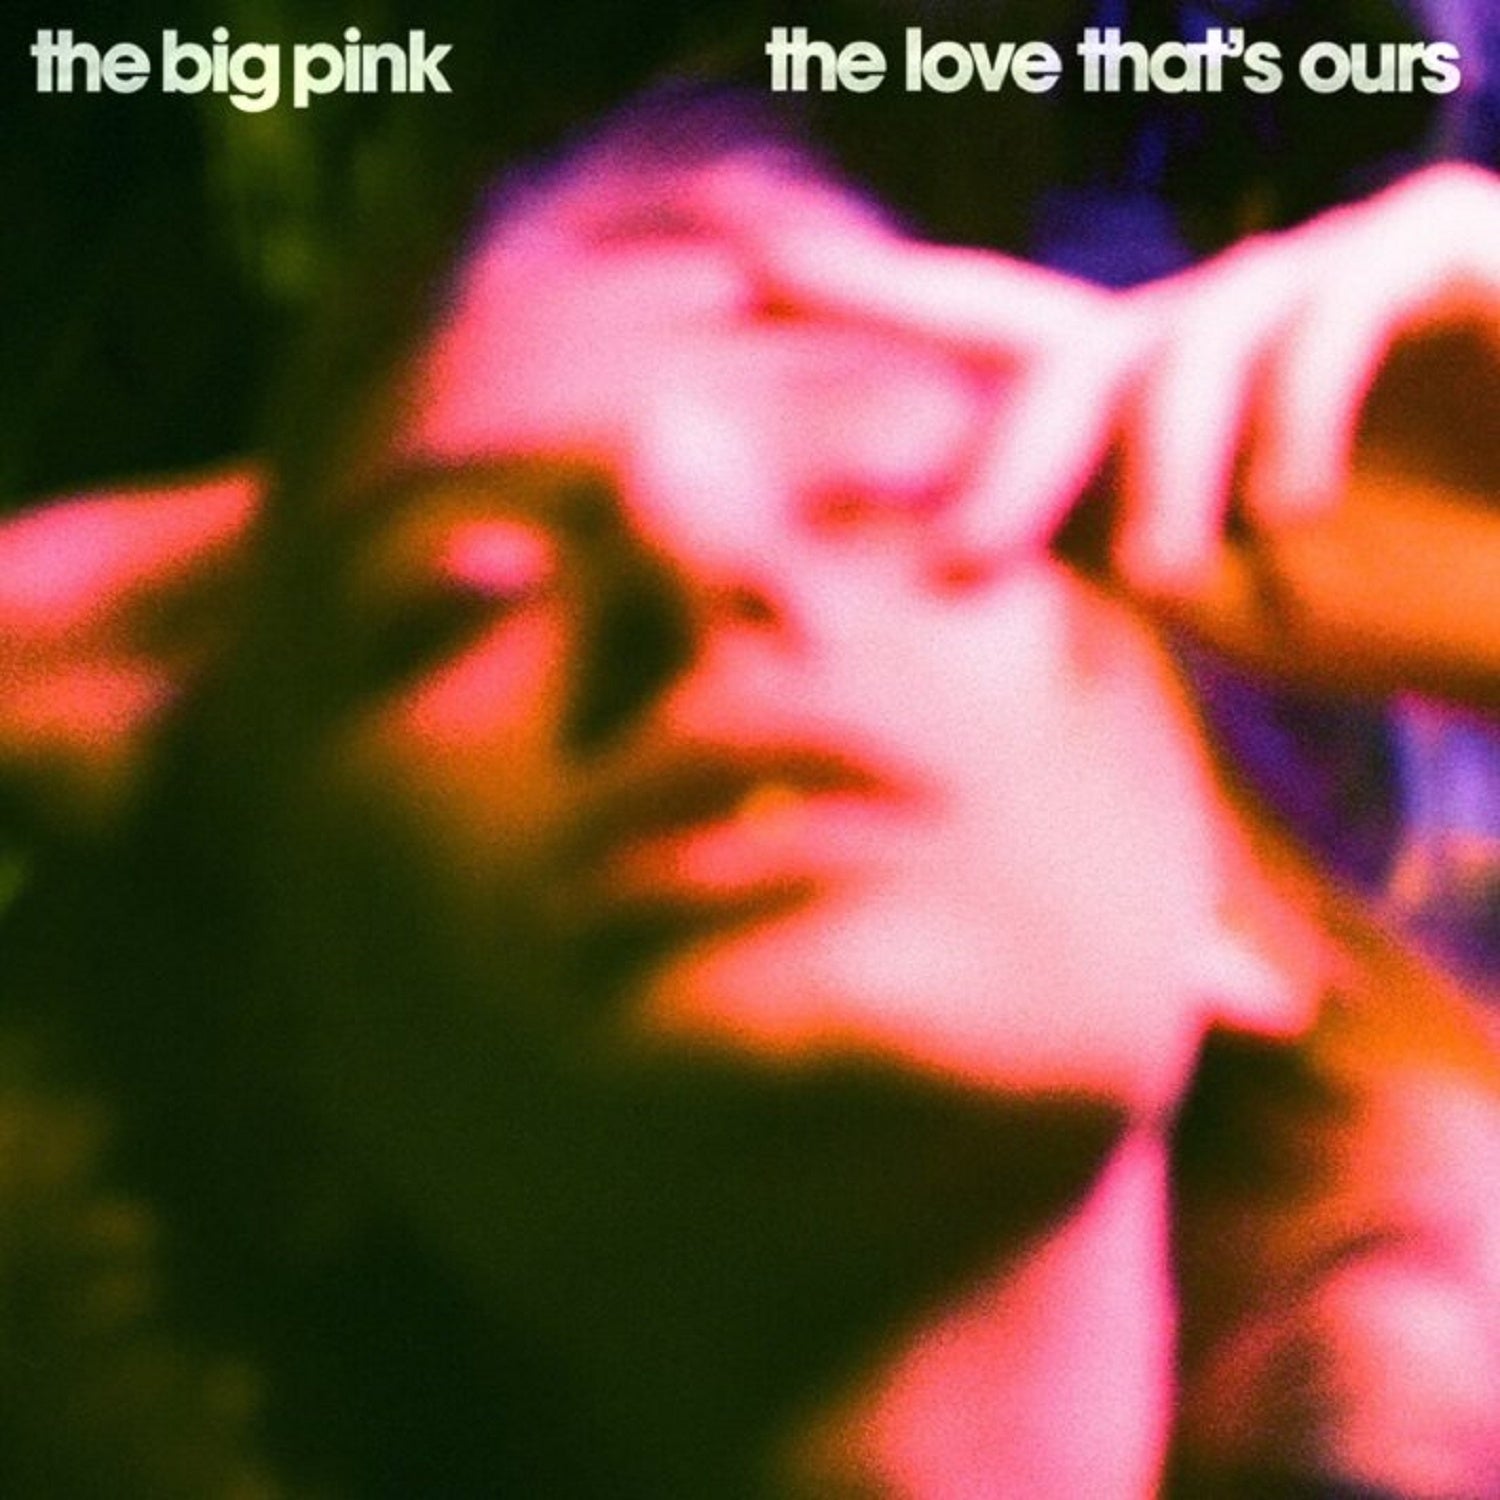 The Big Pink – ‘The Love That’s Ours’